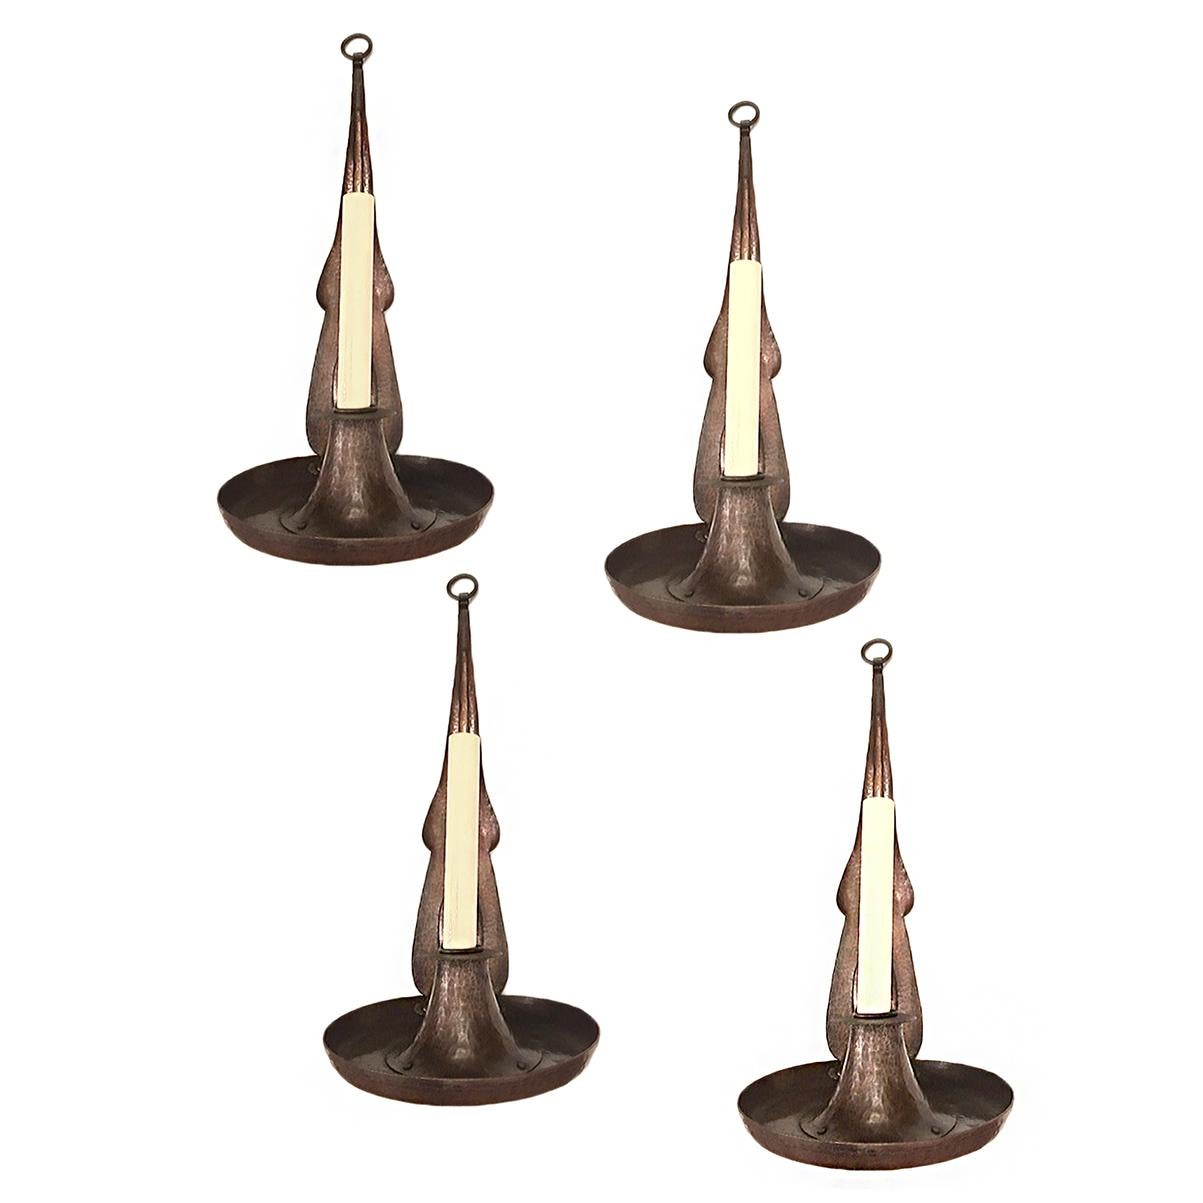 Set of six circa 1920s American Arts & Crafts style hammered copper sconces with single light with original patina. Sold in pairs.

Measurements:
Height 17